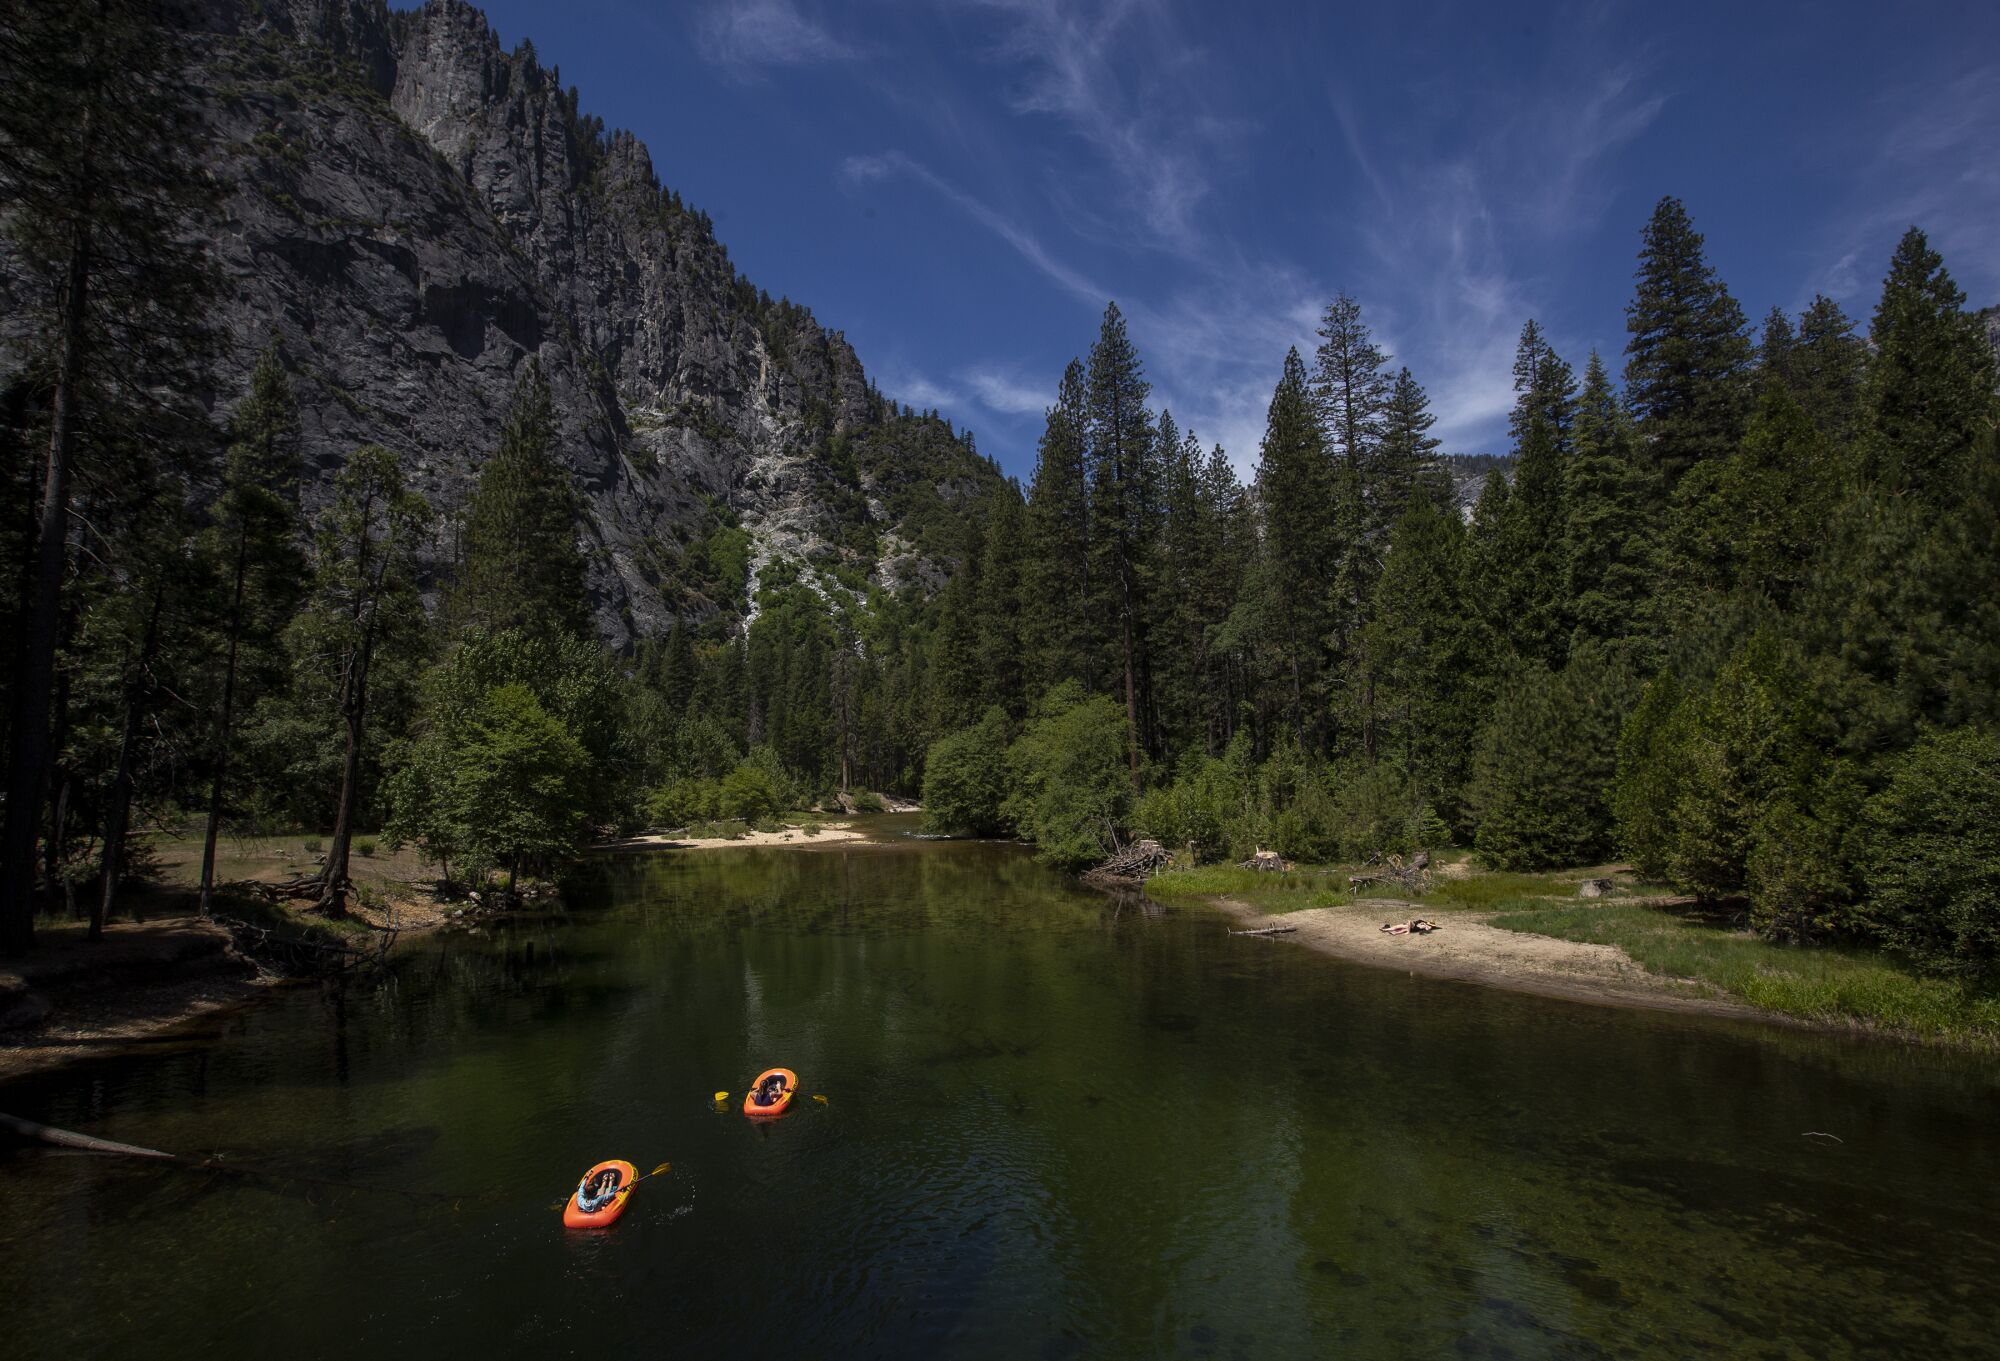 The rafters row down the Merced River in Yosemite Valley.